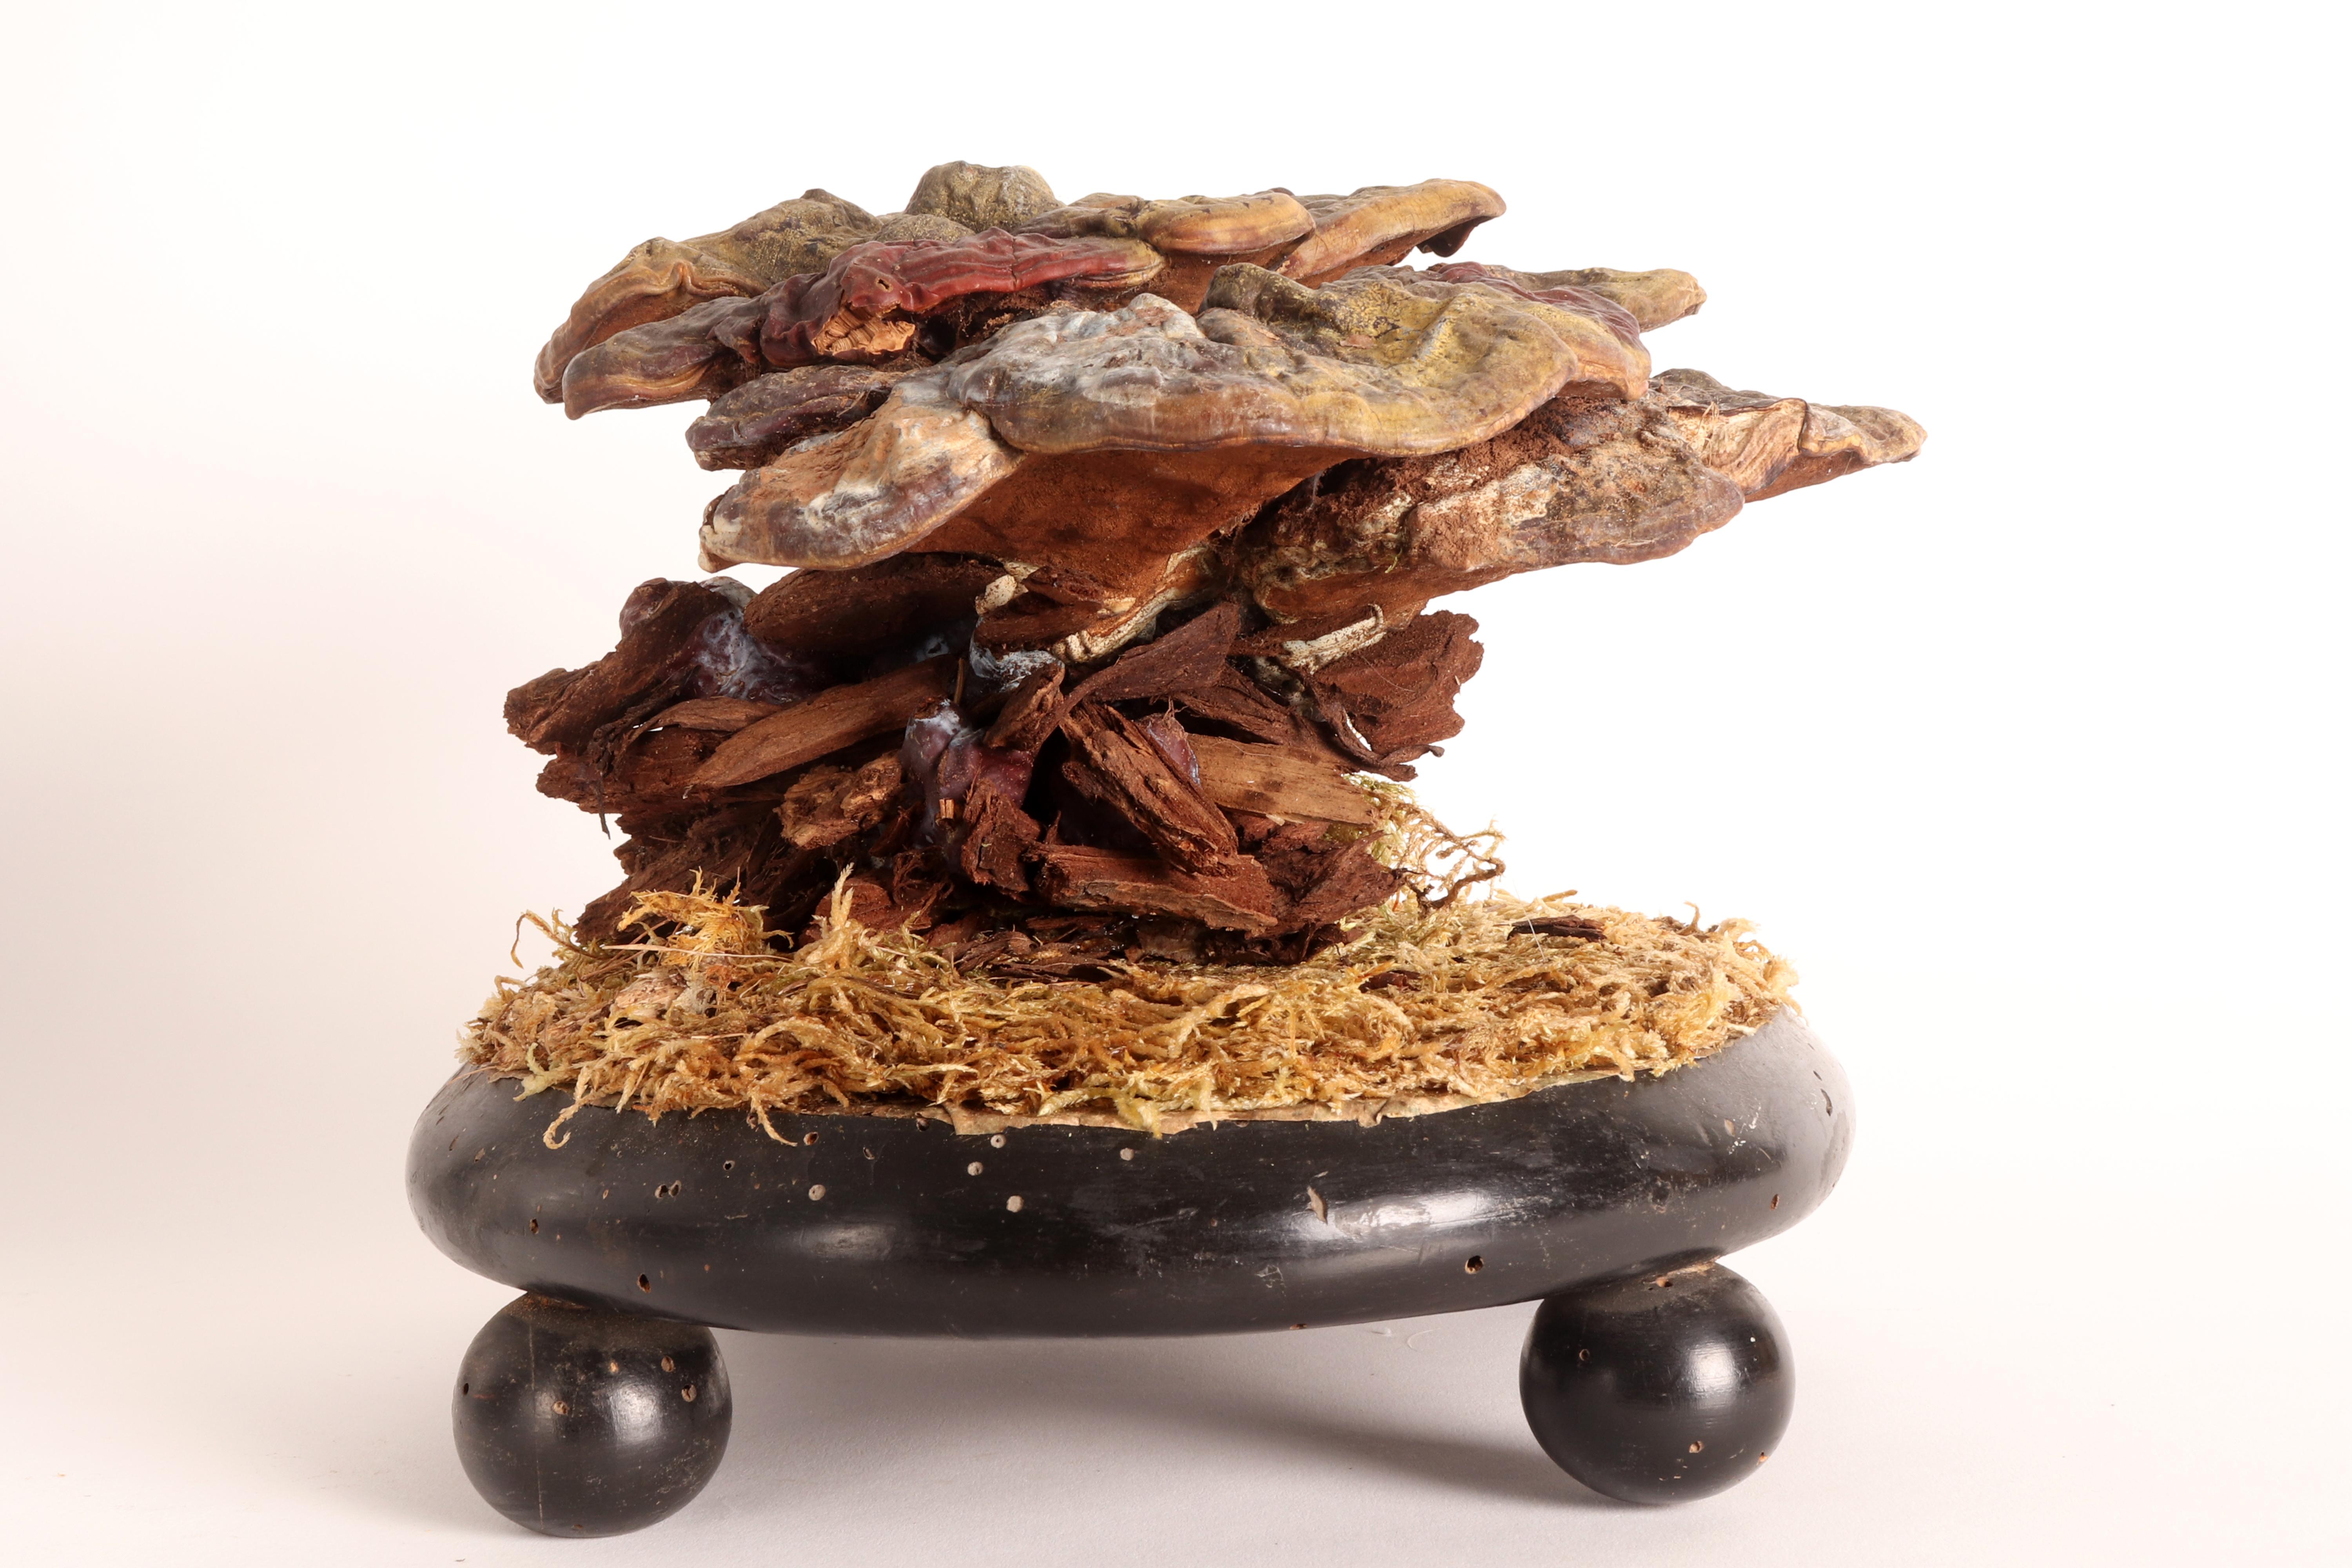 A model for pharmacy of a big mushroom specimen, shelf or lignicolous mushrooms of trees, (Ganoderma Carnosum) made of paper mache painted in watercolor on an oval-shaped wooden base, resting on 4 small black wooden spheres with moss and hay. Italy